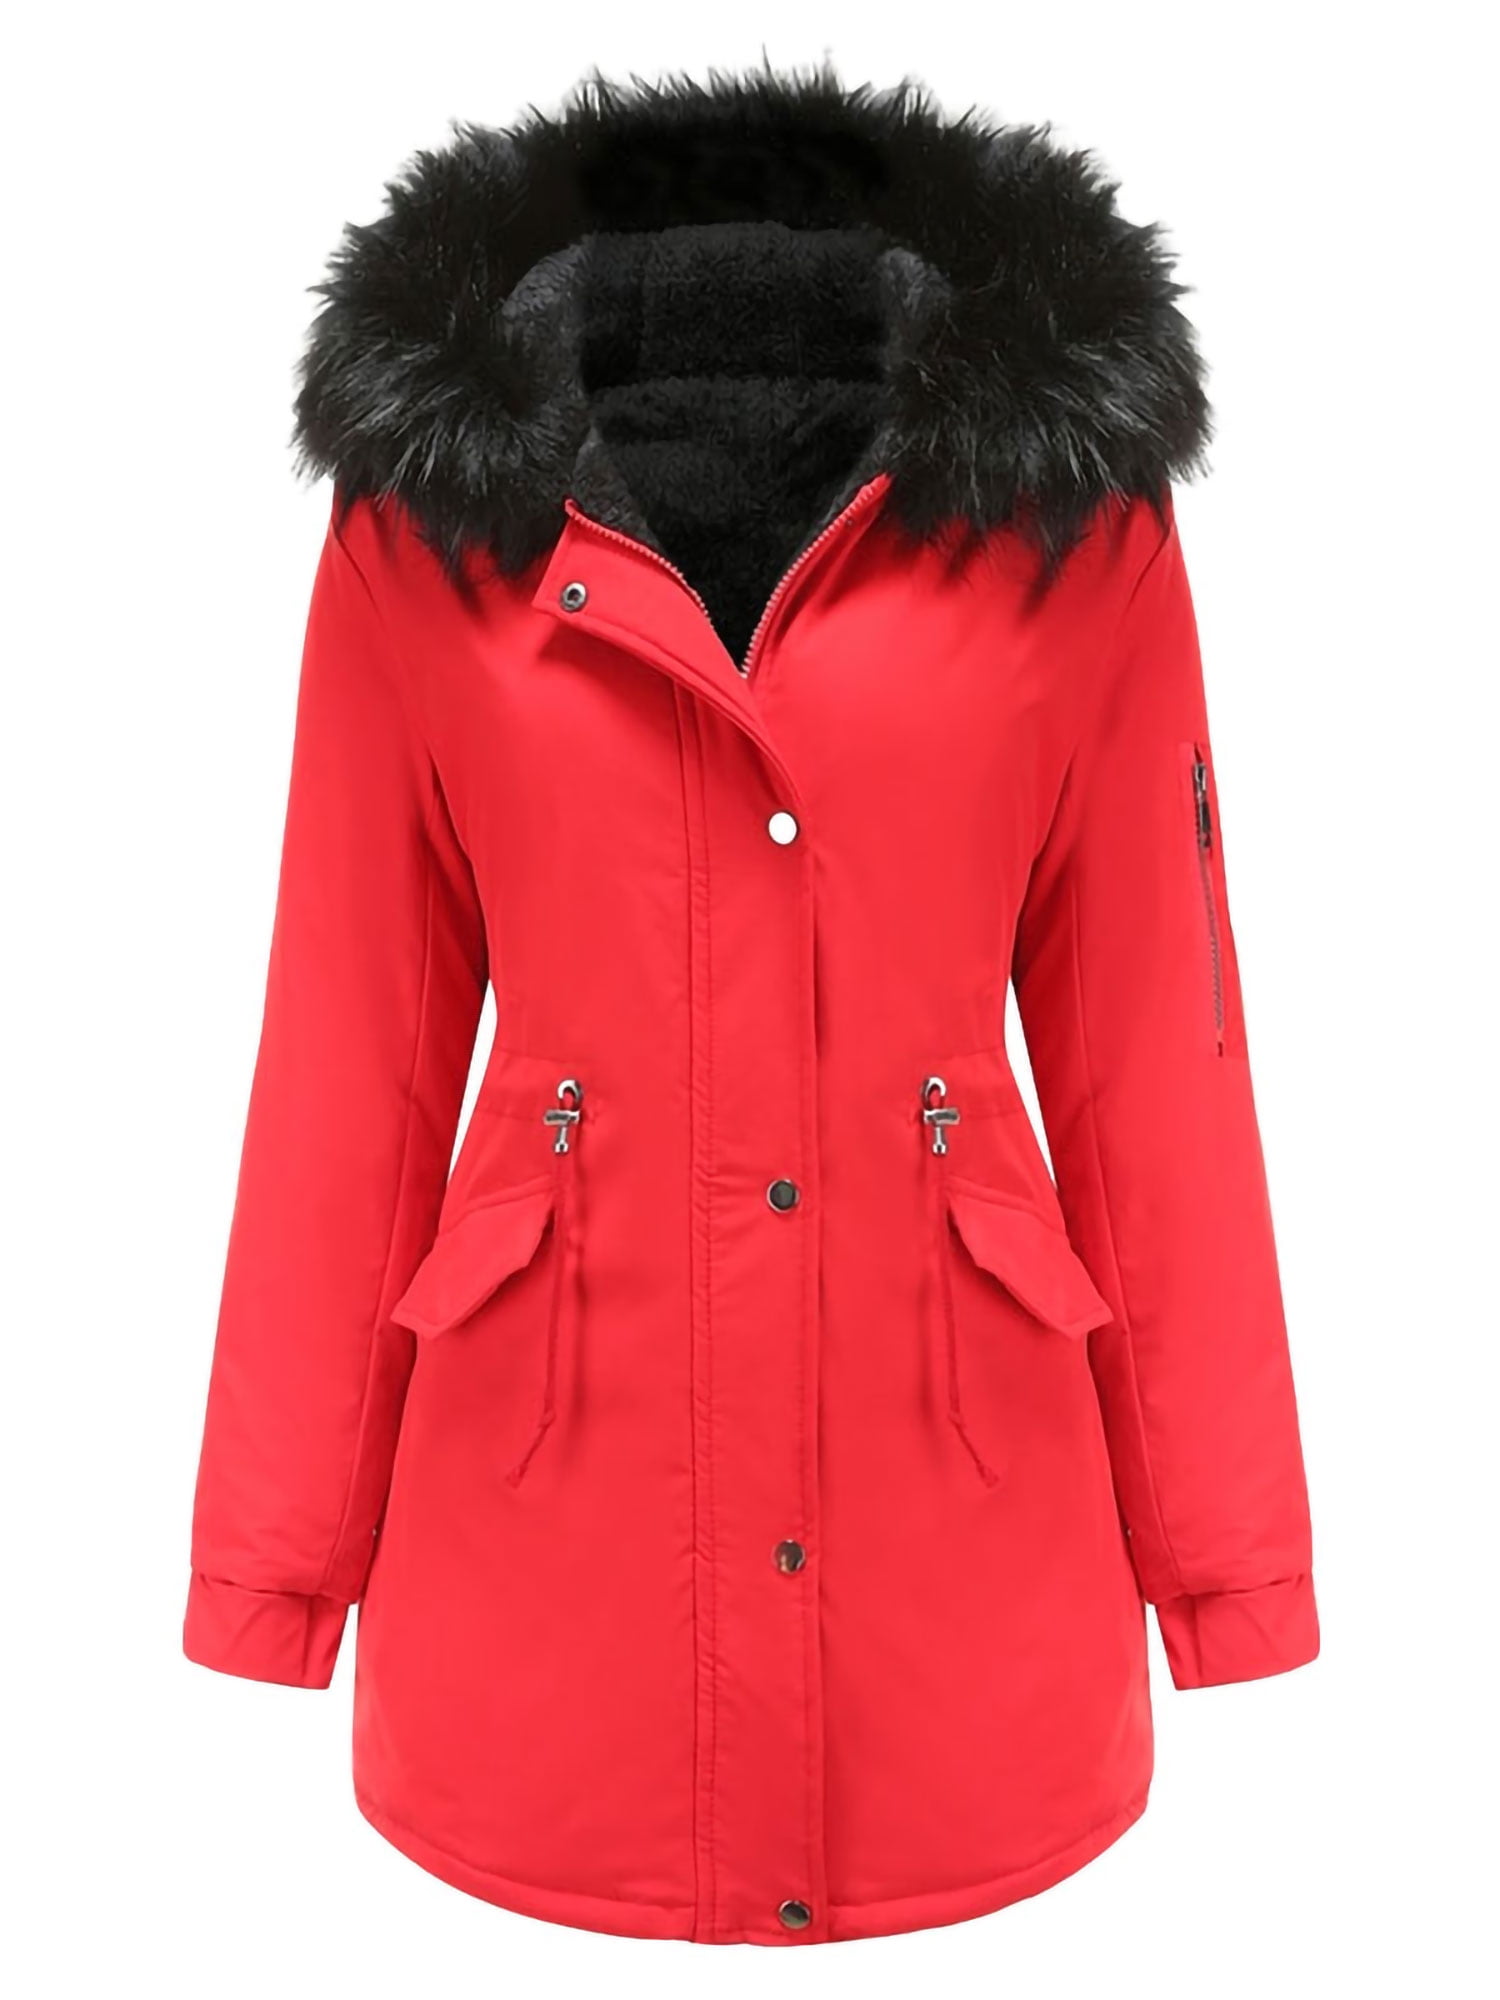 Outwear Quilted Winter Warm Fur Collar Hooded Thicken Jacket Tops E-Scenery Women Coats